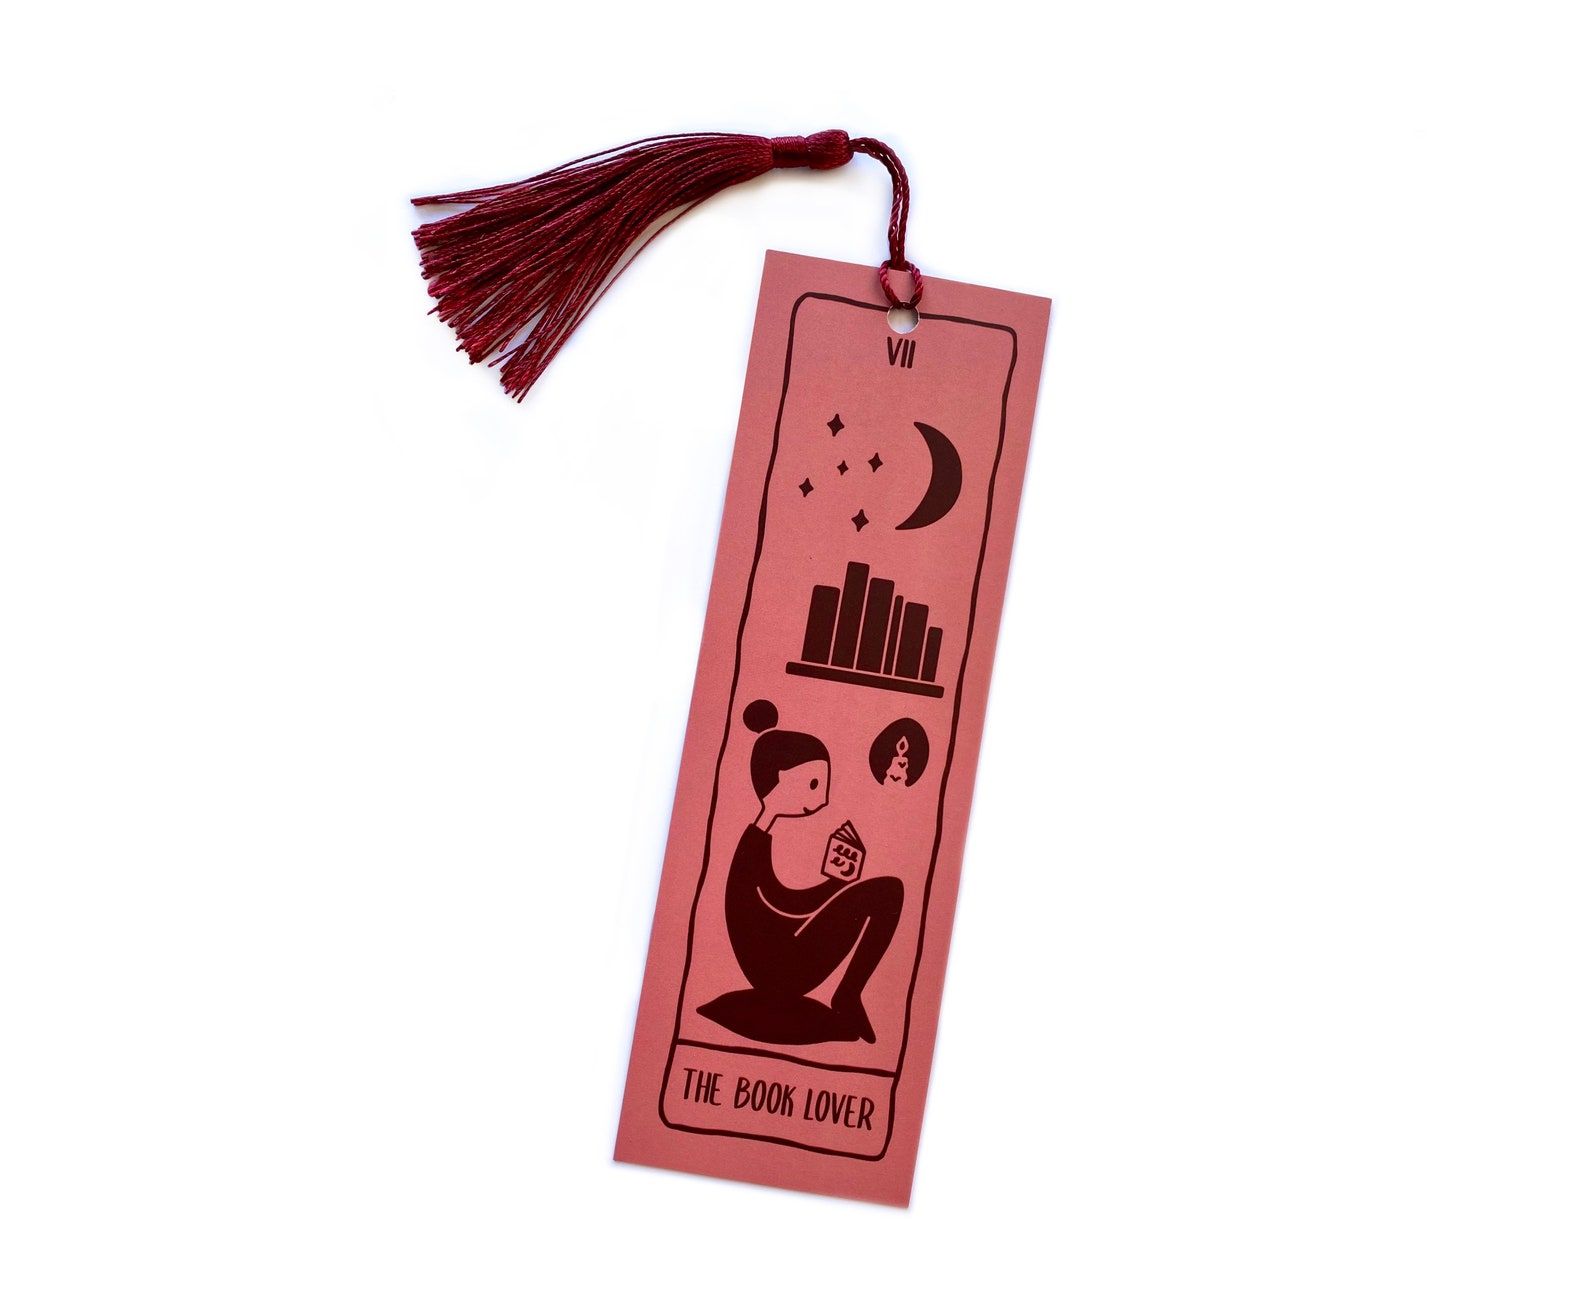 Image of a pink bookmark with a pink tassel. The bookmark is designed like a tarot card called "The Book Lover," featuring a person reading, a bookshelf, and a moon and stars.